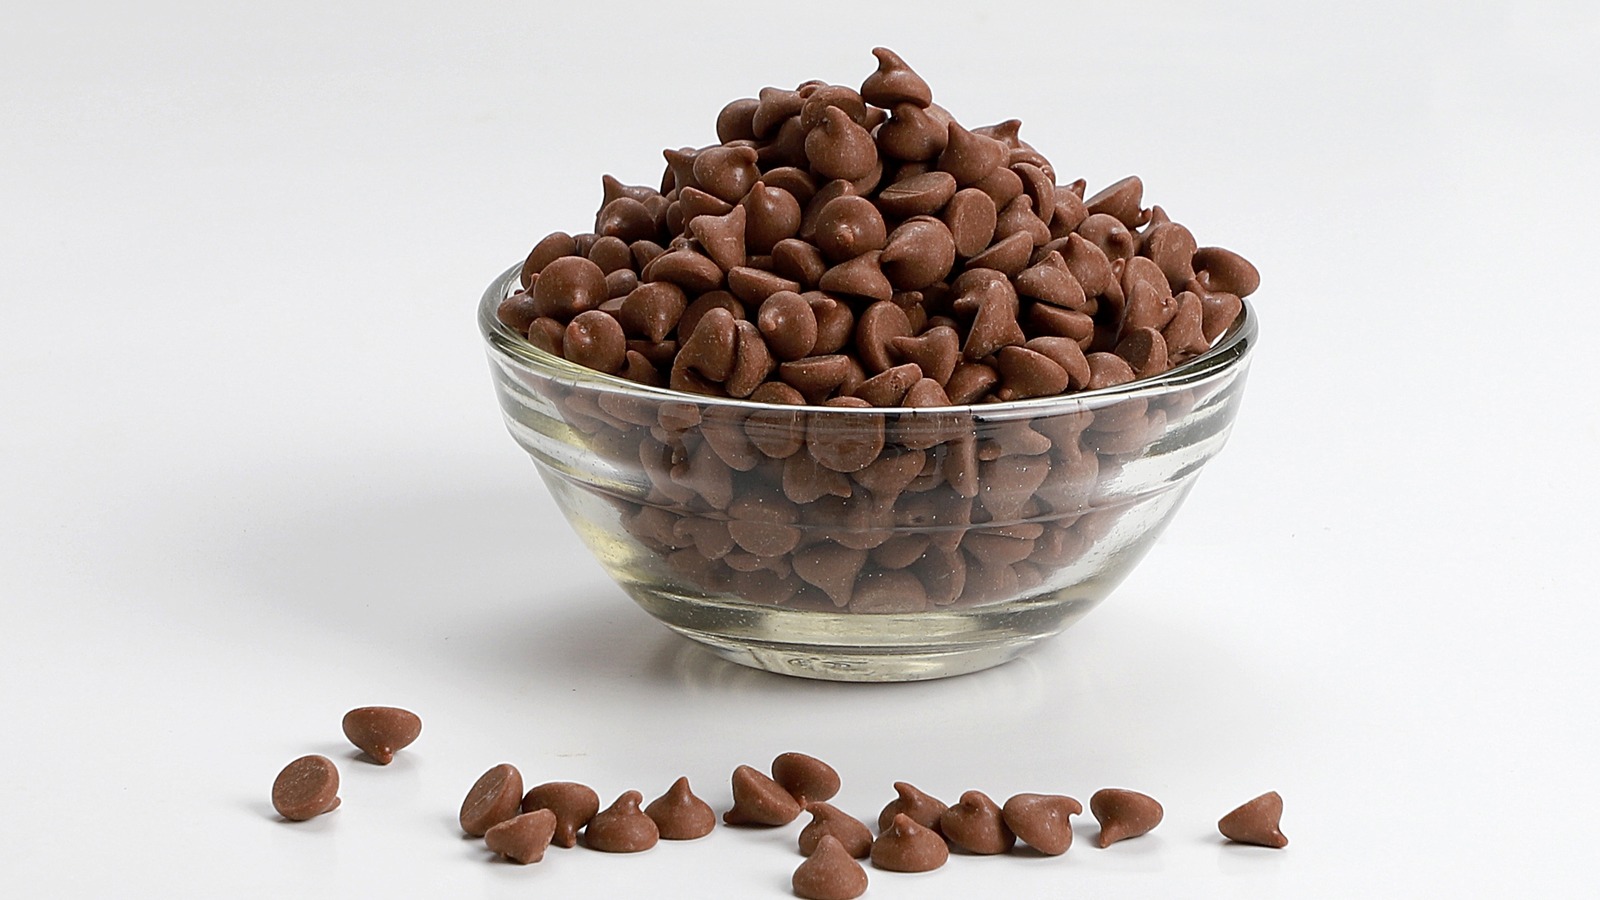 Should Chocolate Chips Be Stored In The Freezer?